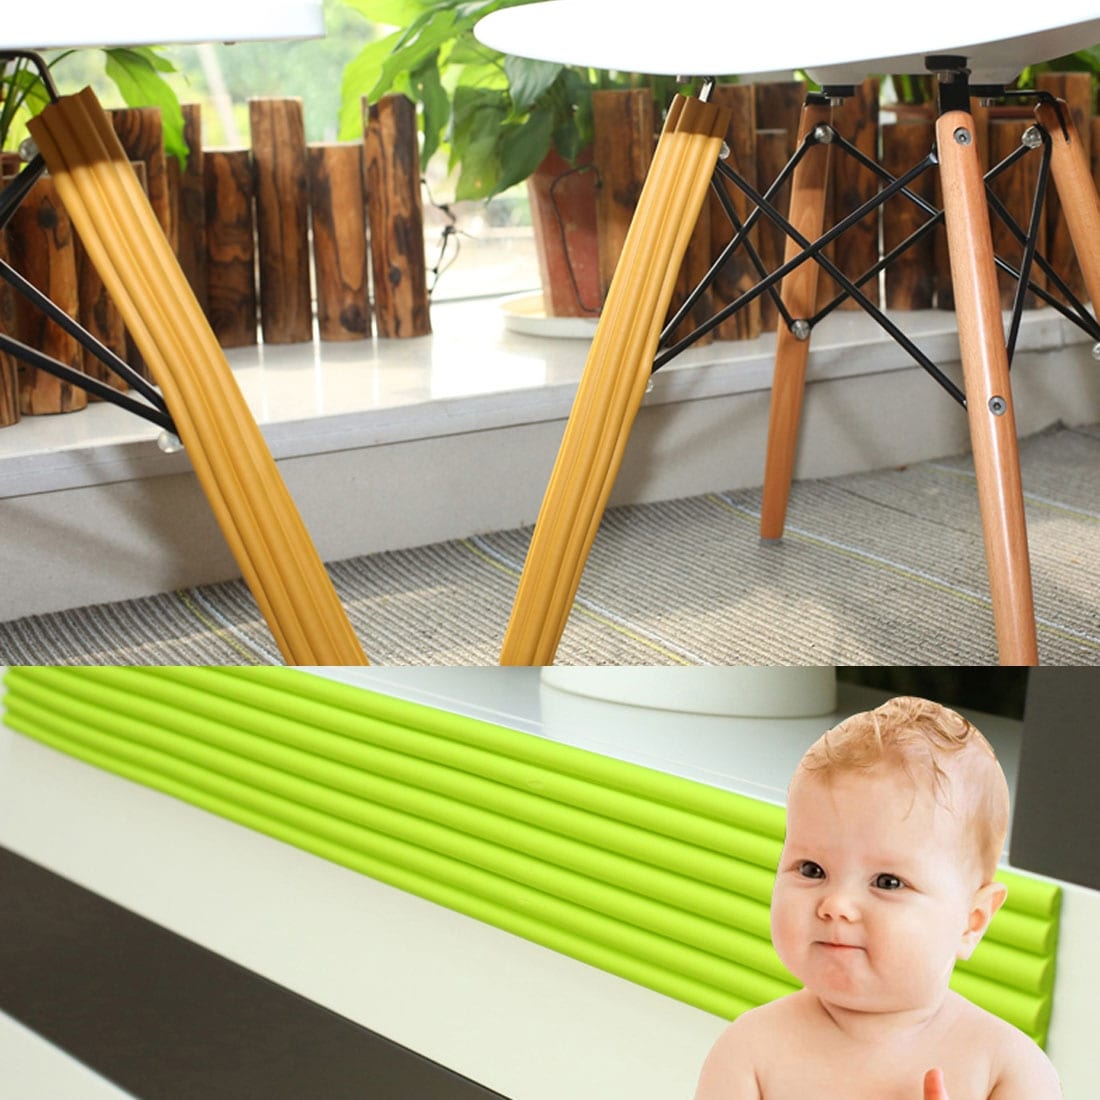 https://ak1.ostkcdn.com/images/products/is/images/direct/5896e9543df8924bf0ca460302b8ee7935dab69e/Table-Desk-Edge-Corner-Cushion-Guard-Protector-Bumper.jpg